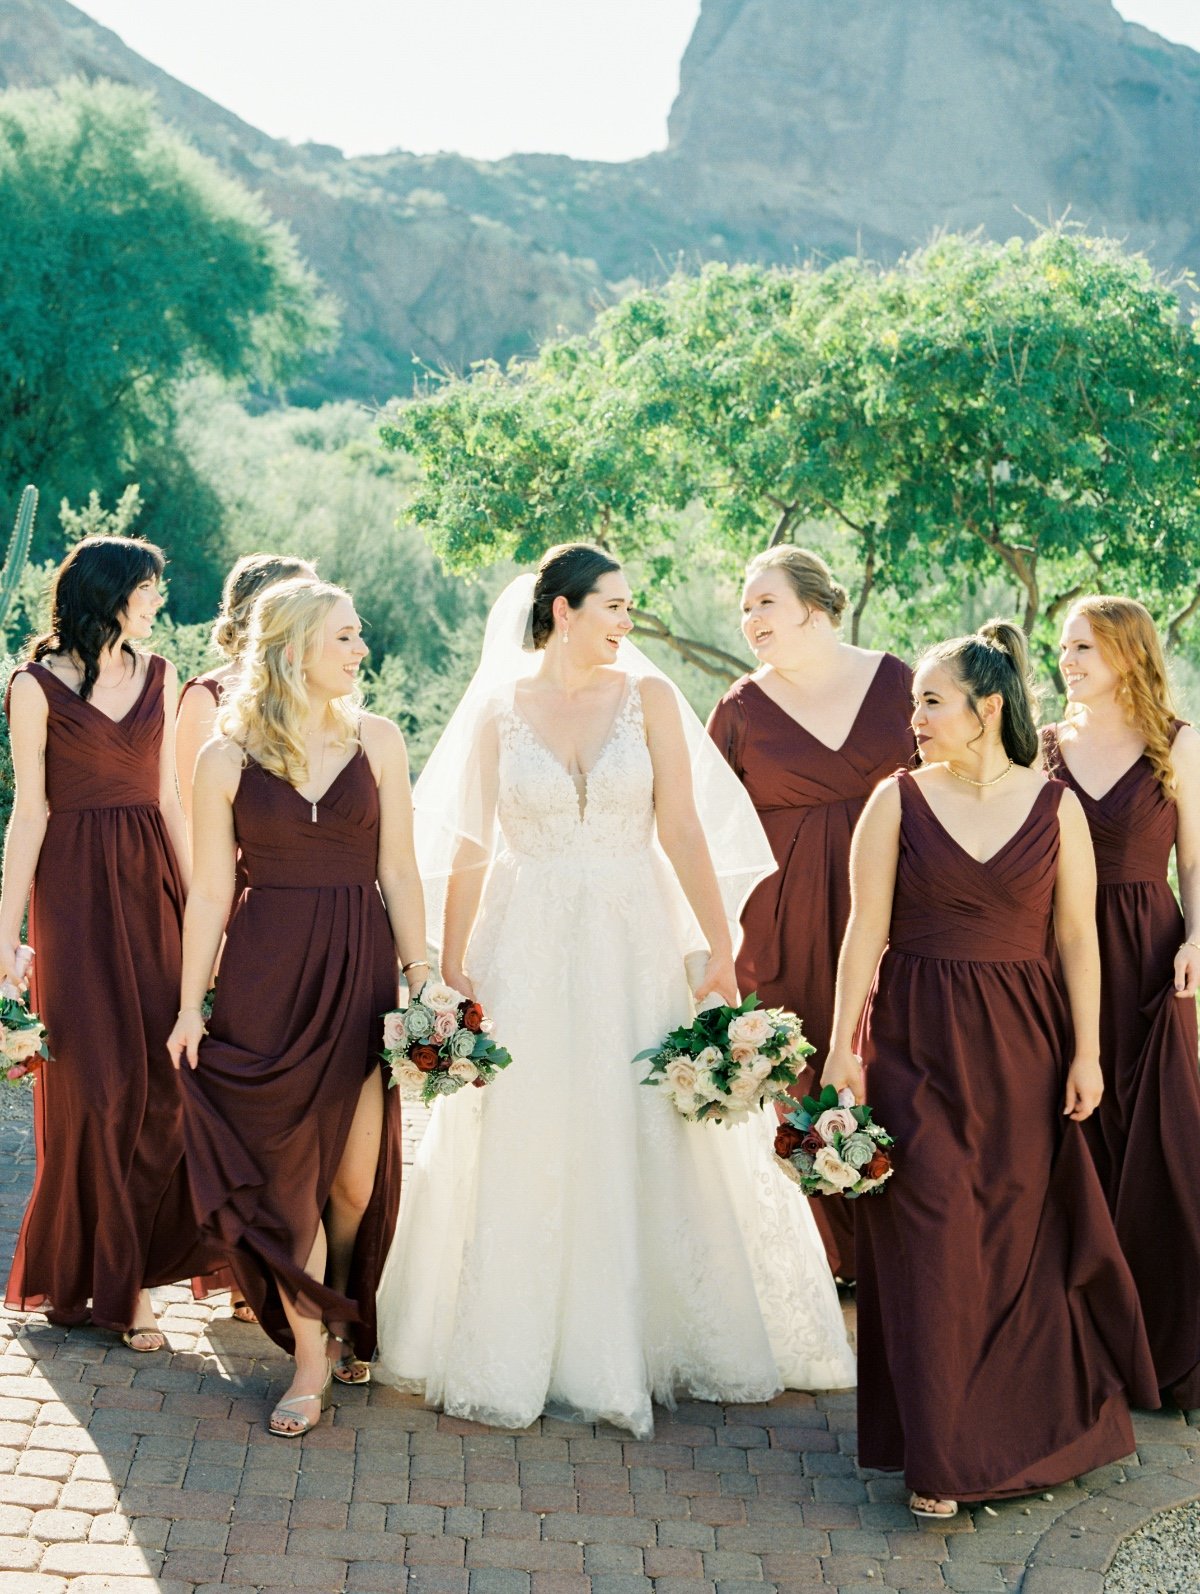 Can't Decide Between A Church Wedding And An Outdoor CeremonyâYou Don't Have To